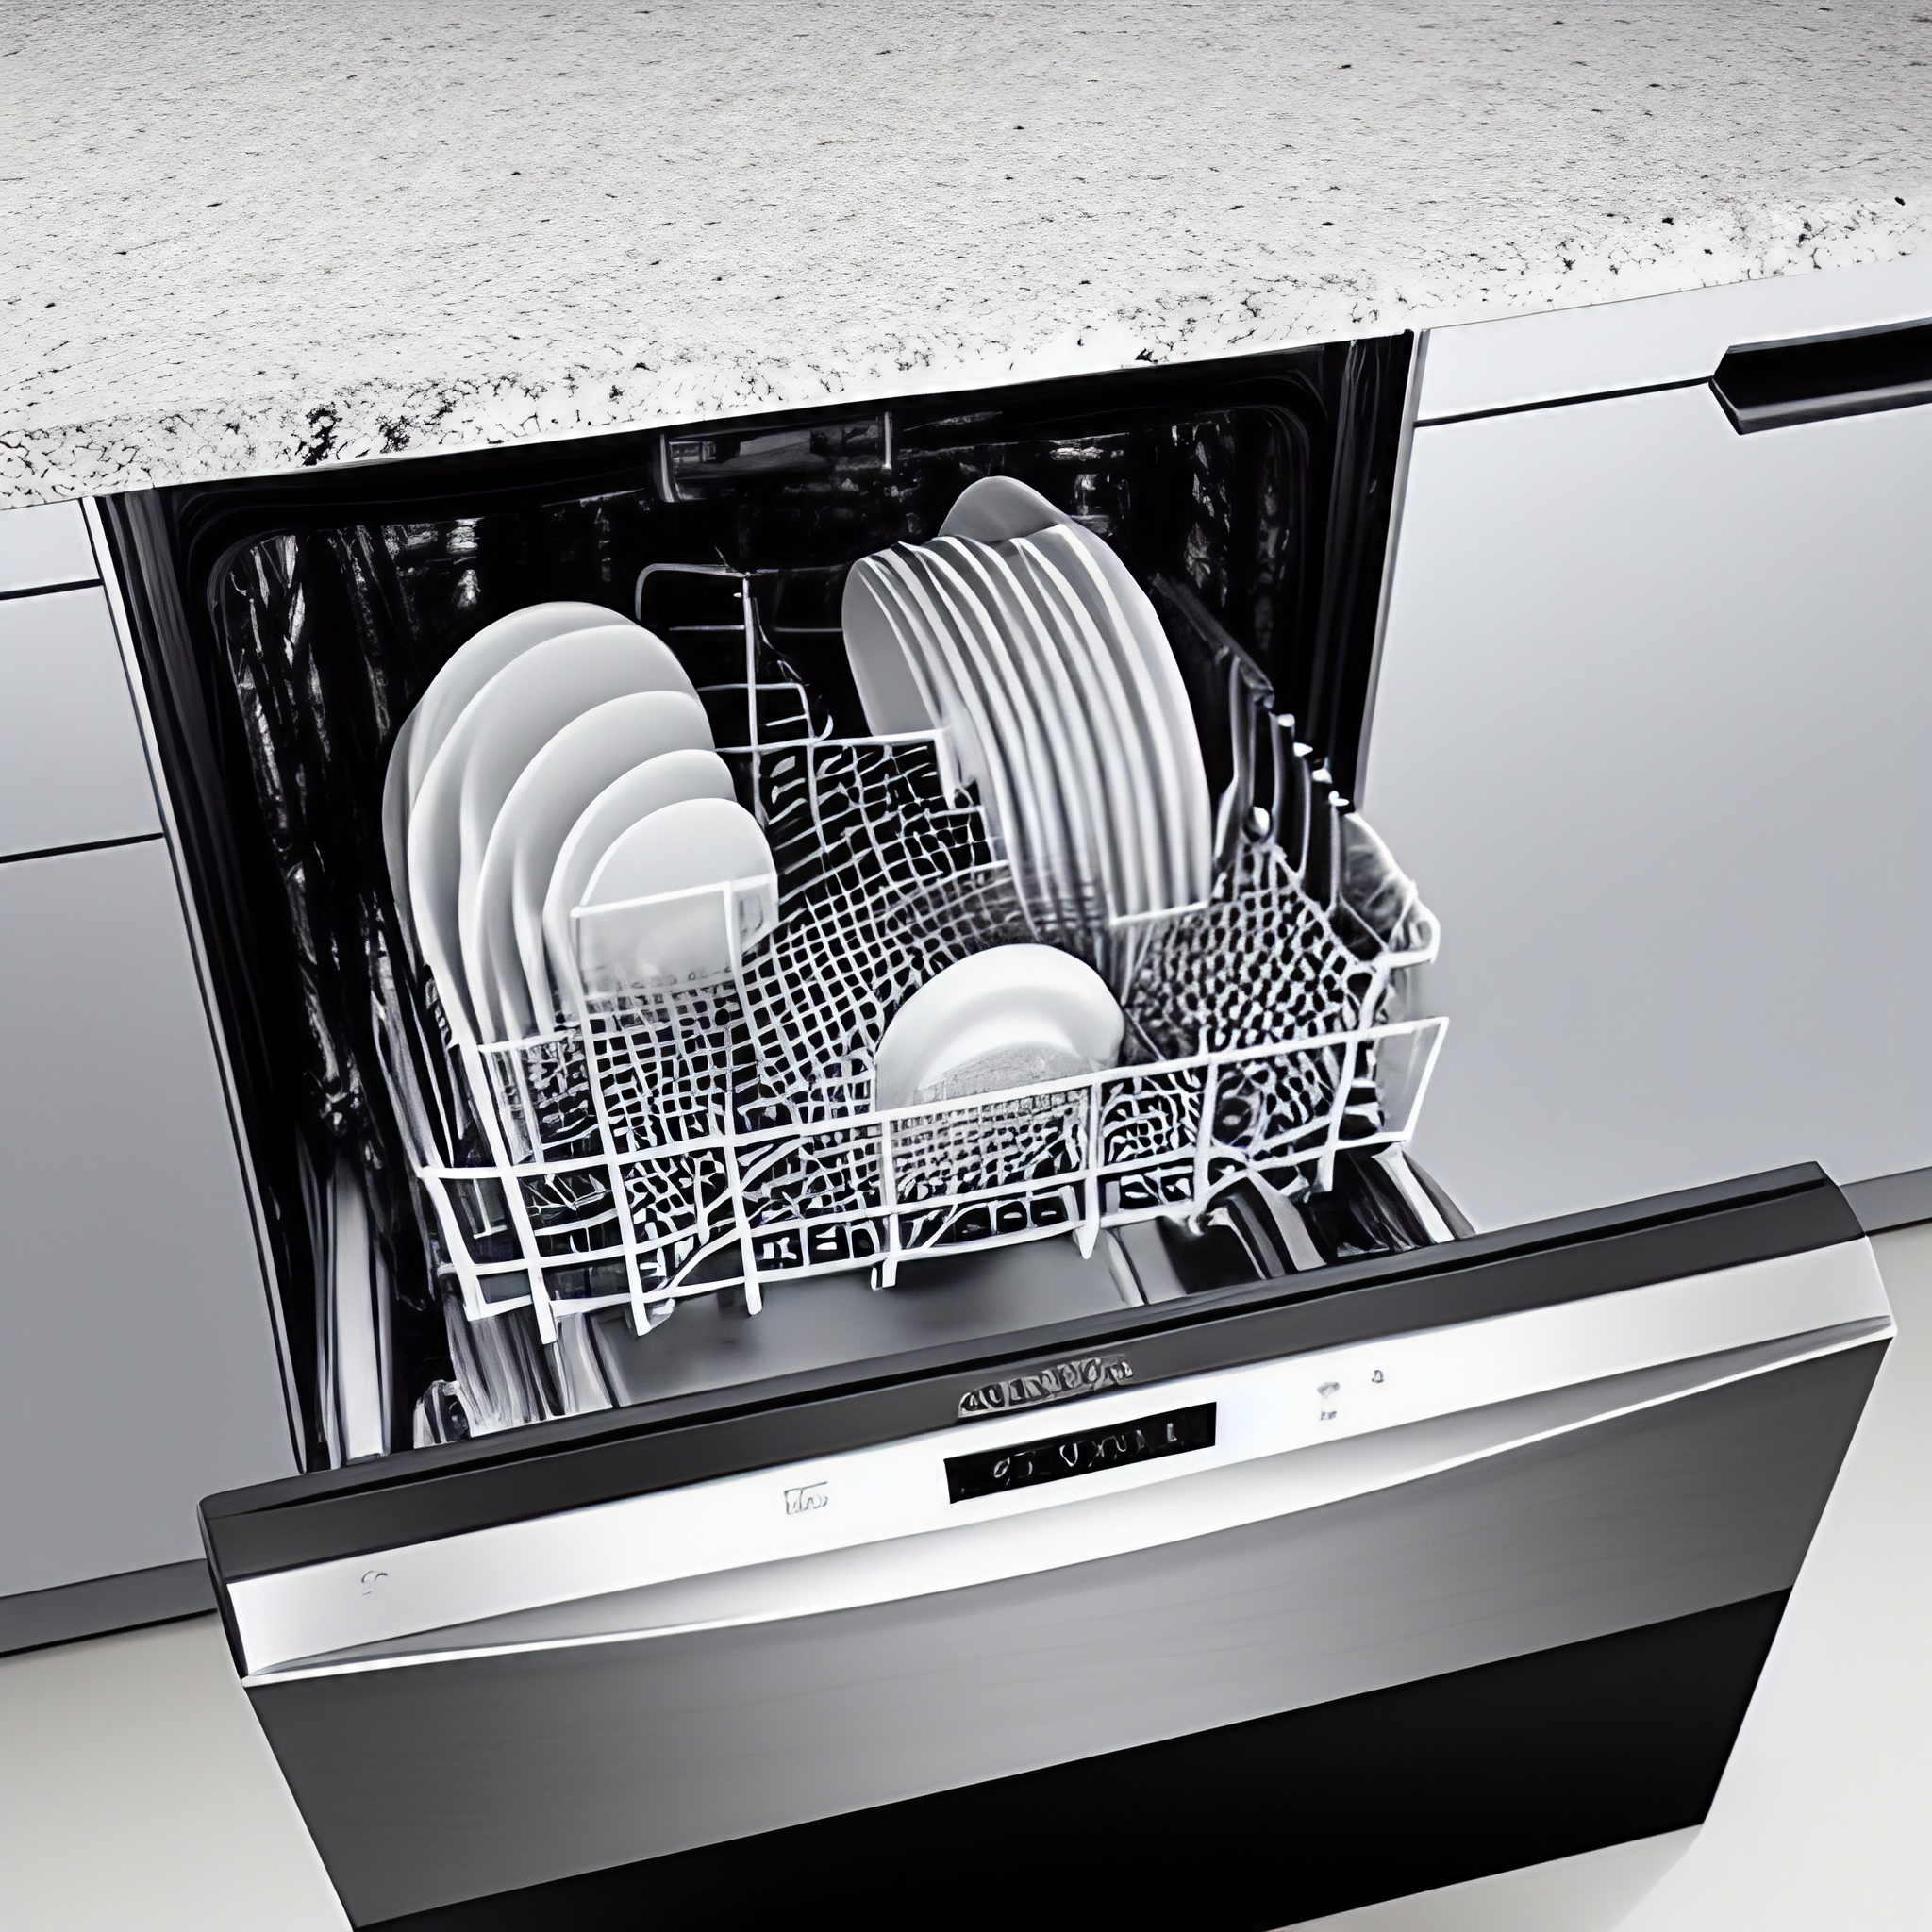 Common Samsung dishwasher problems and how to fix them?